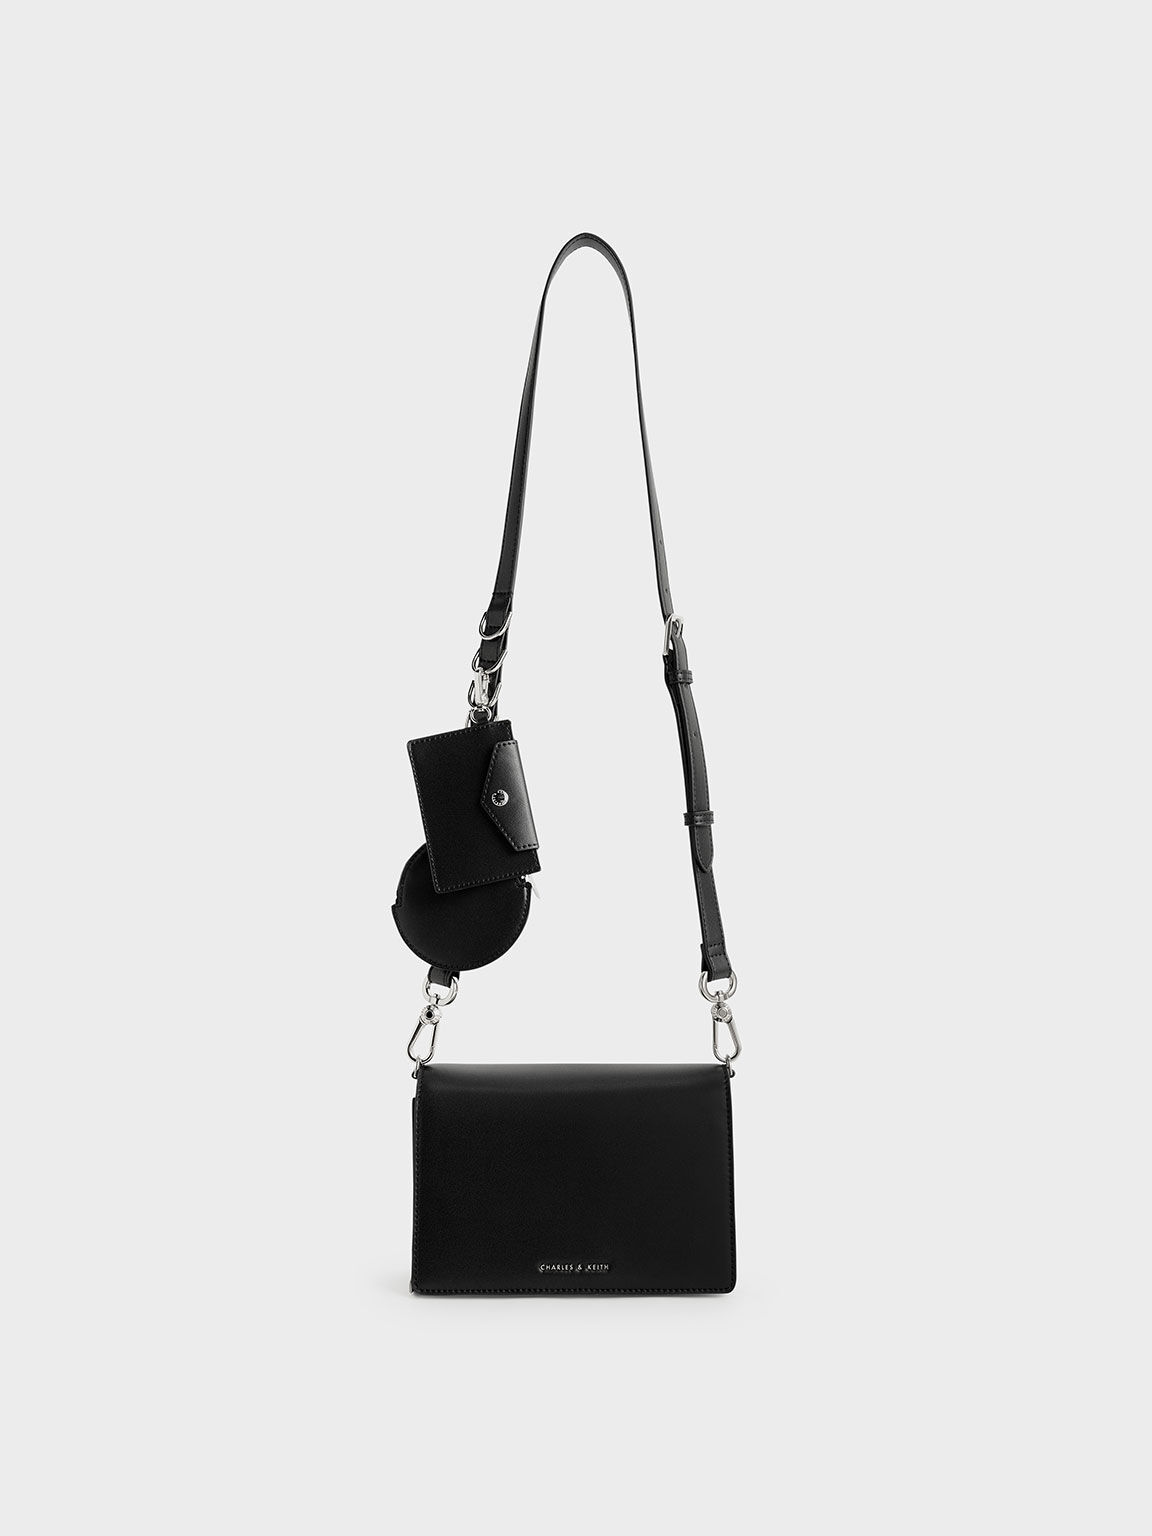 Charles & Keith Multi-pouch Crossbody Bag in Black